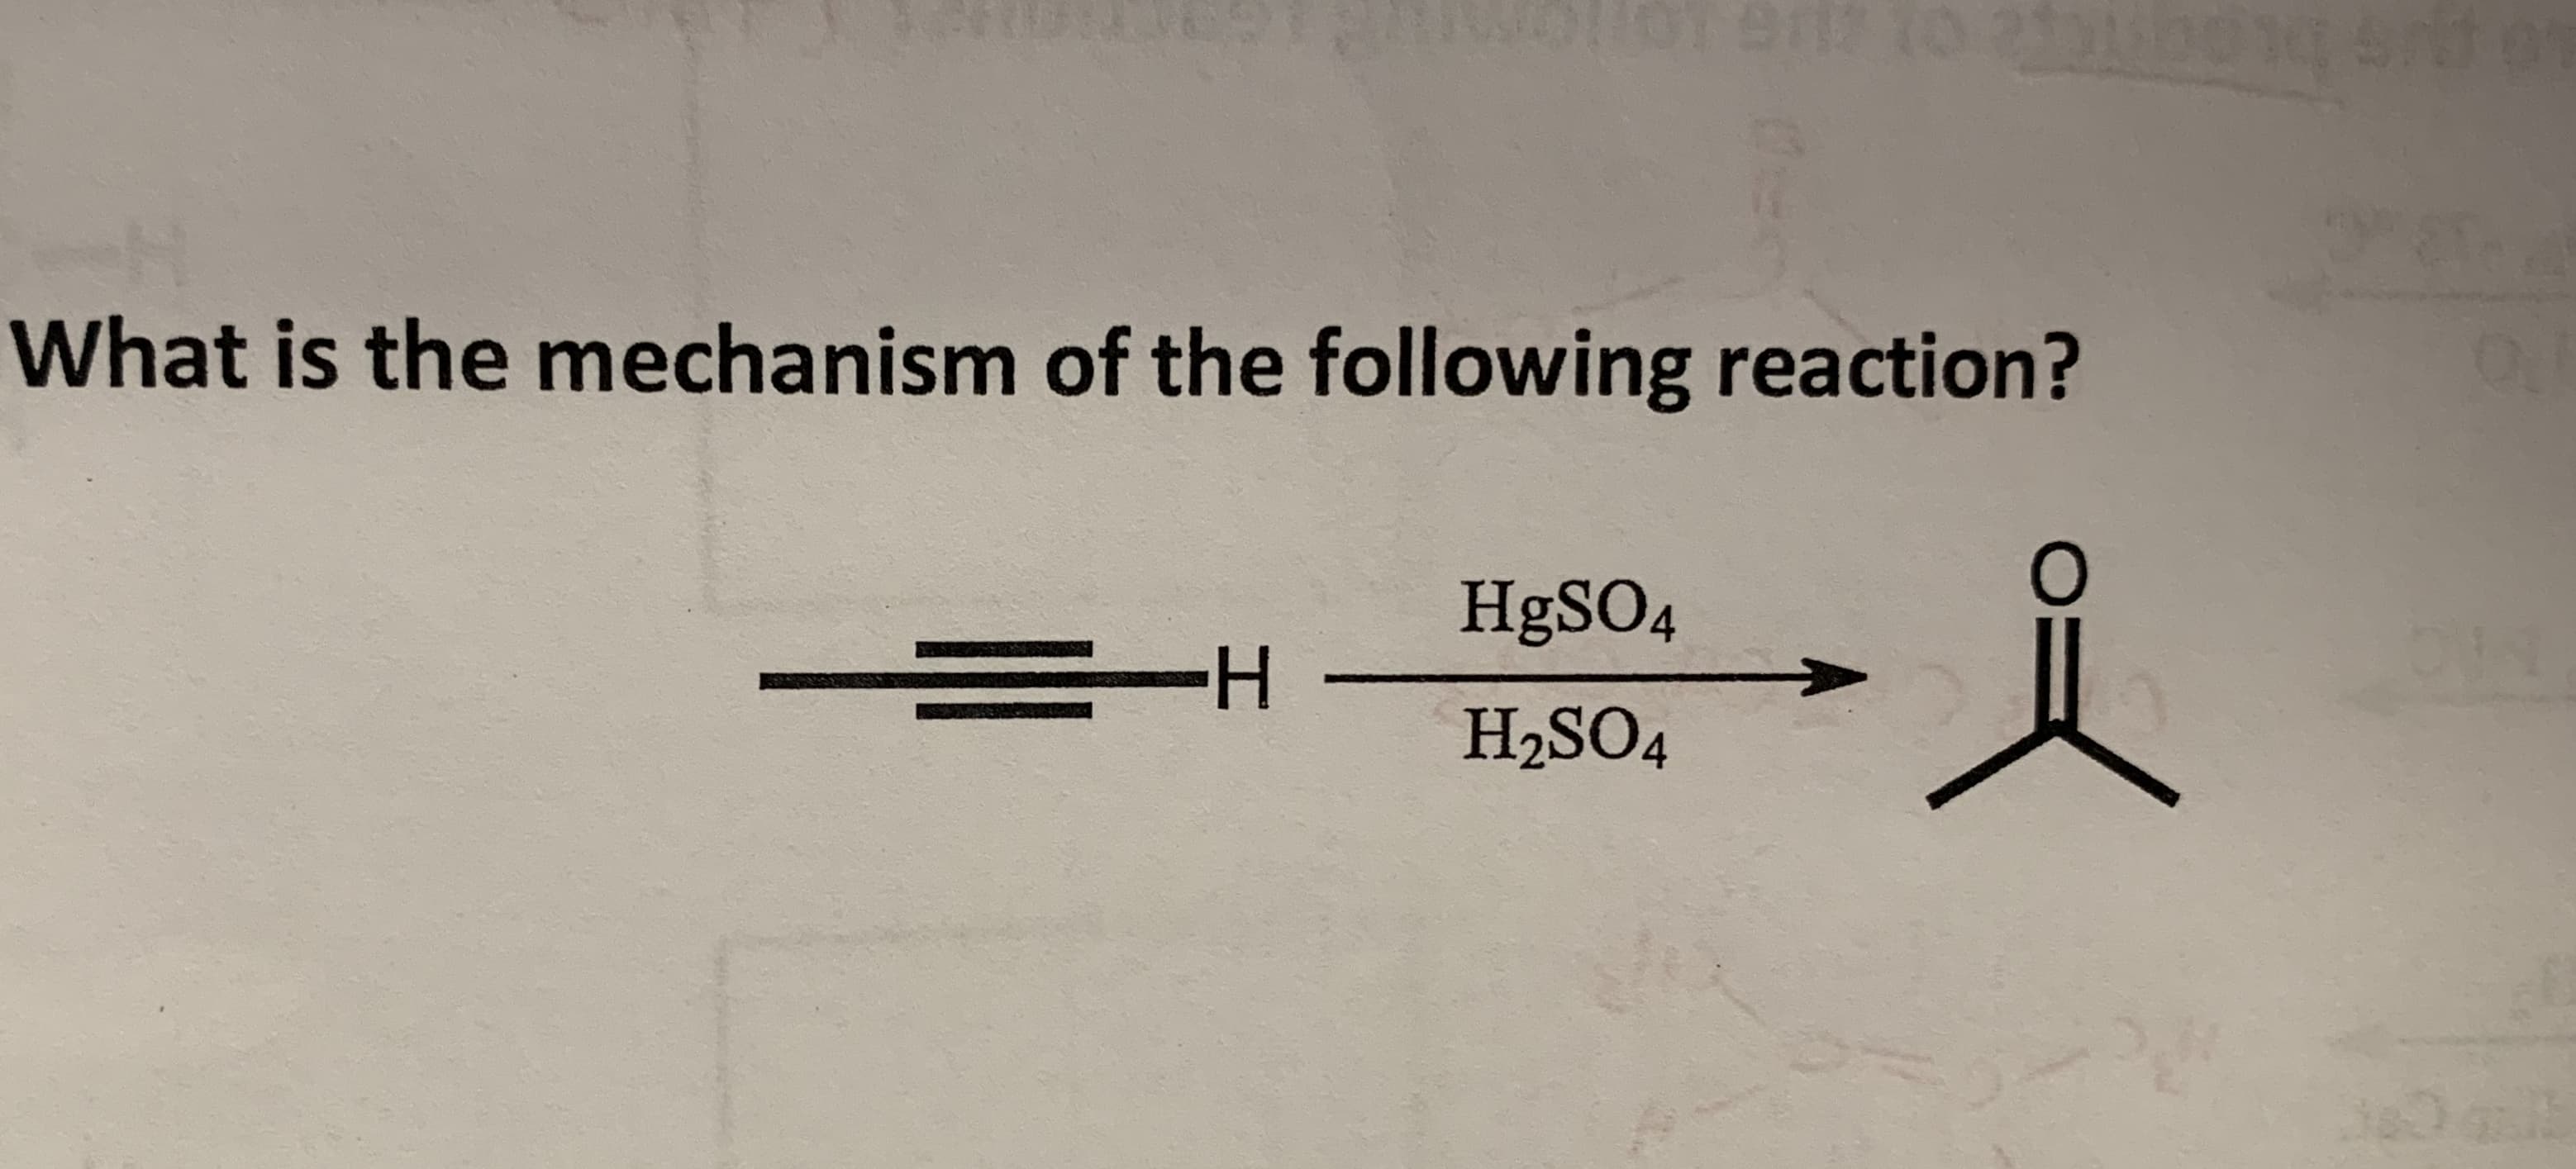 What is the mechanism of the following reaction?
HgSO4
H2SO4
